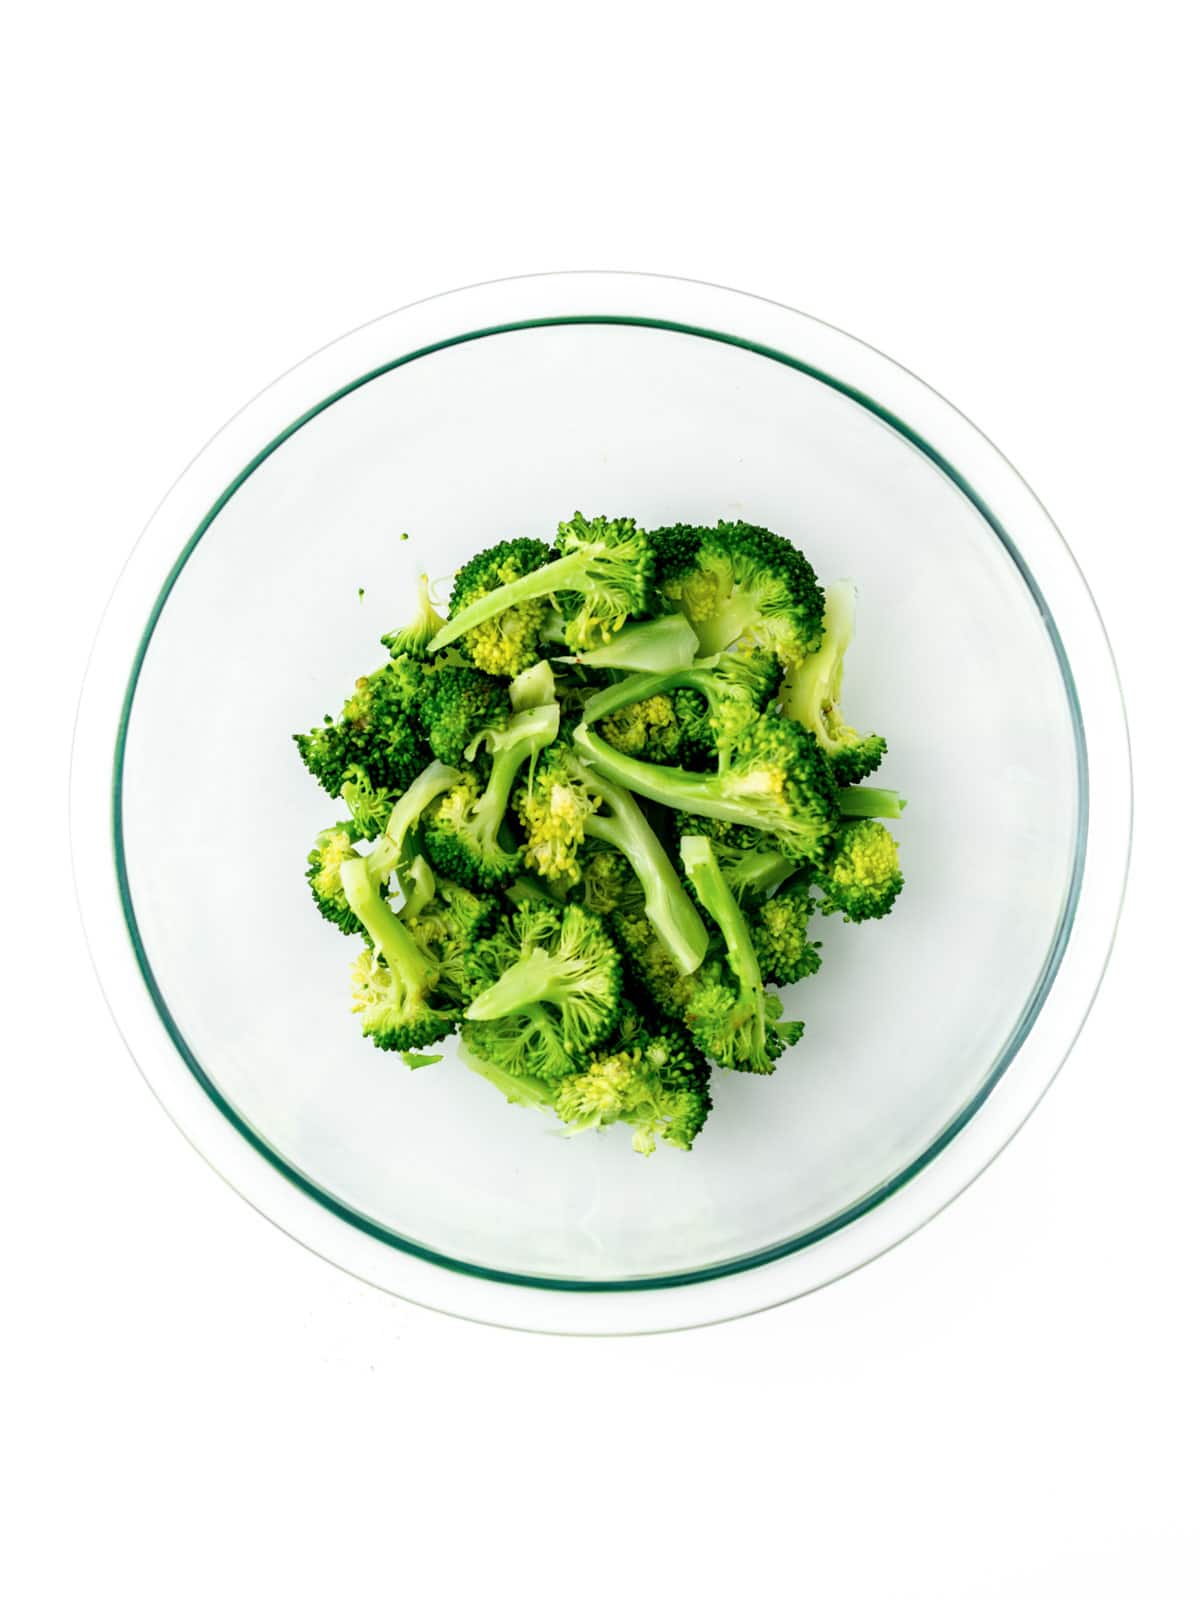 Steamed broccoli for the hidden veggie nuggets in a bowl.